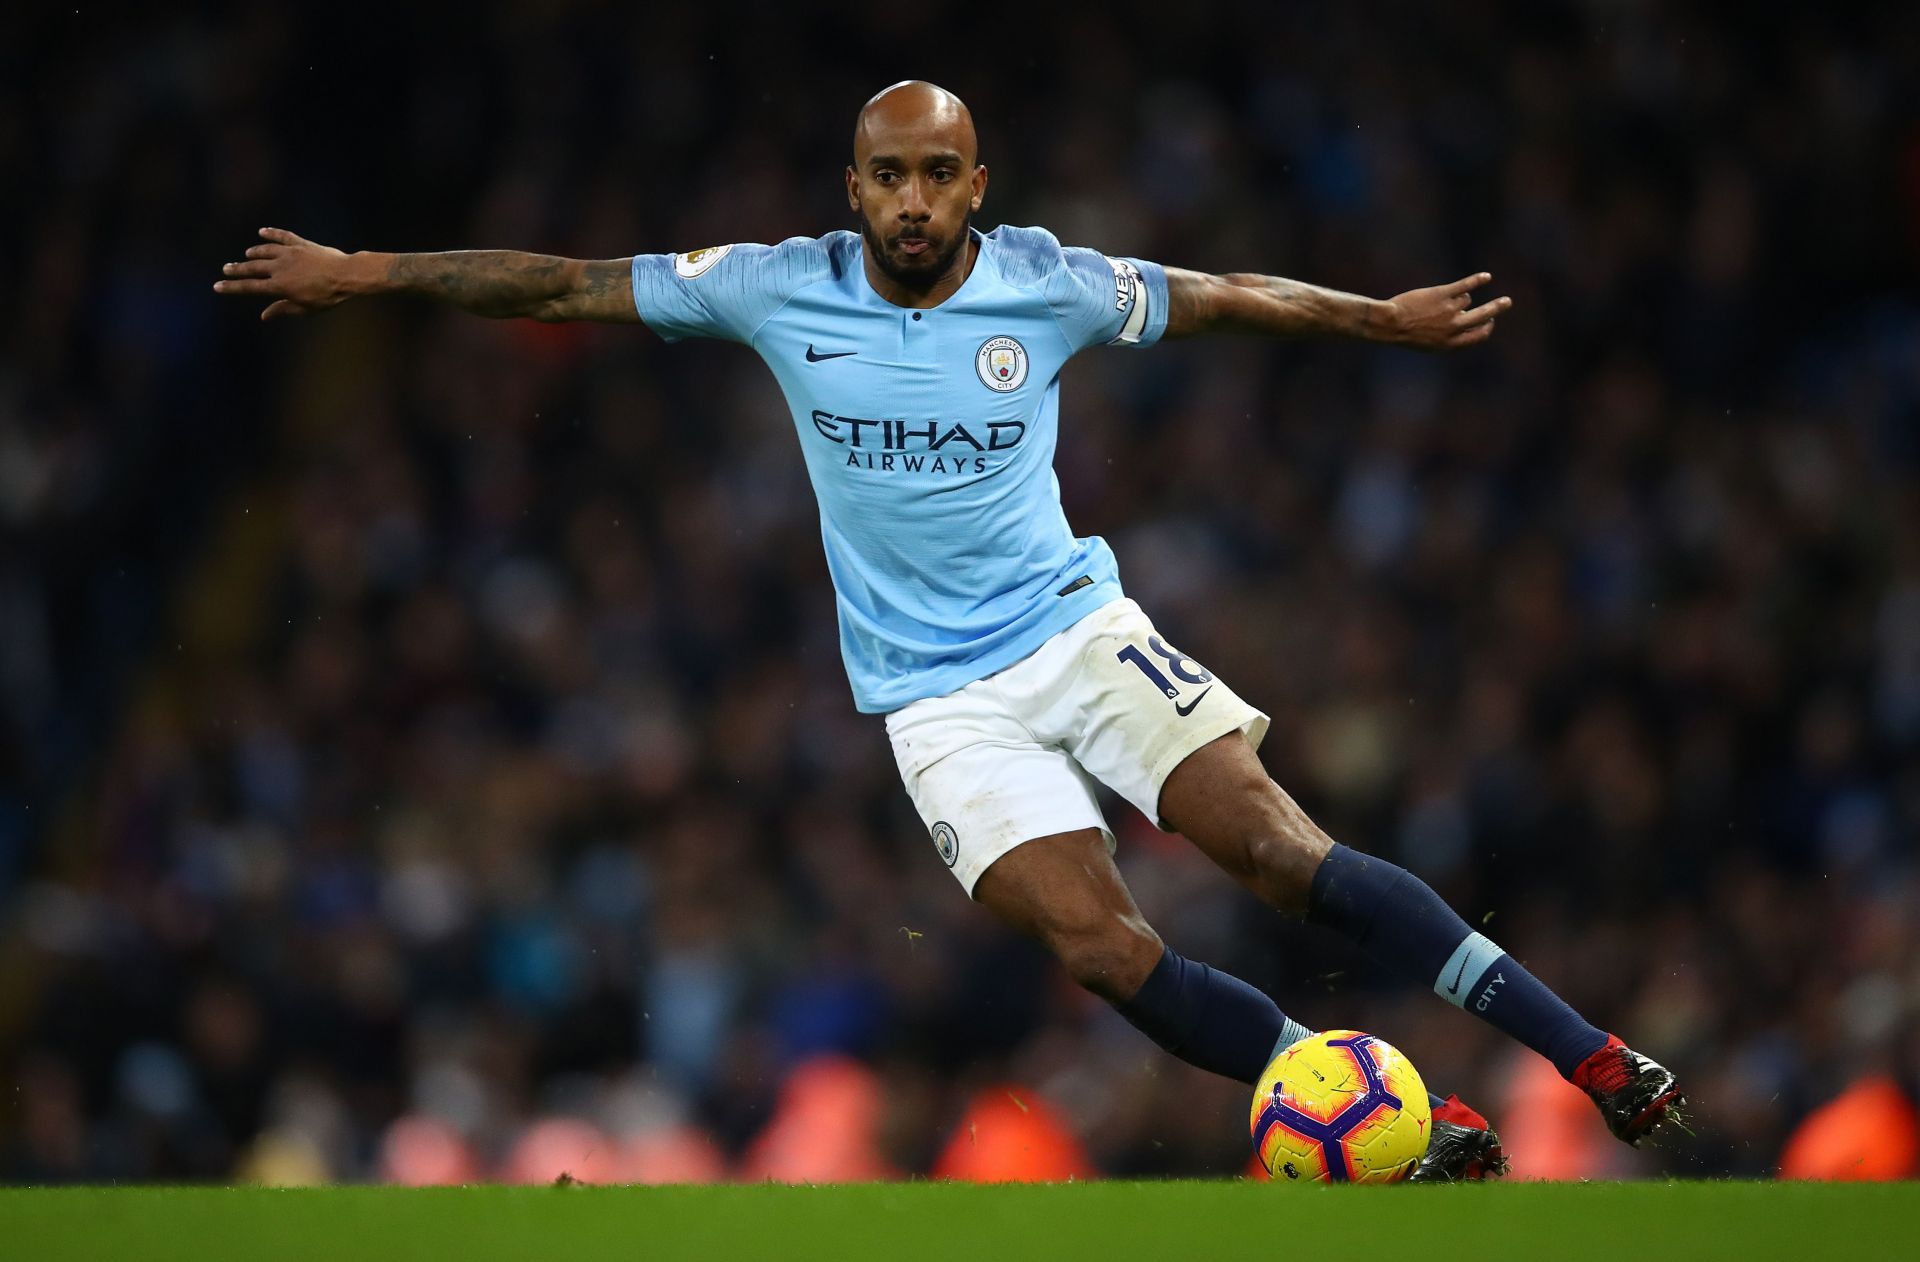 Delph was a 2-time league winner at Manchester City